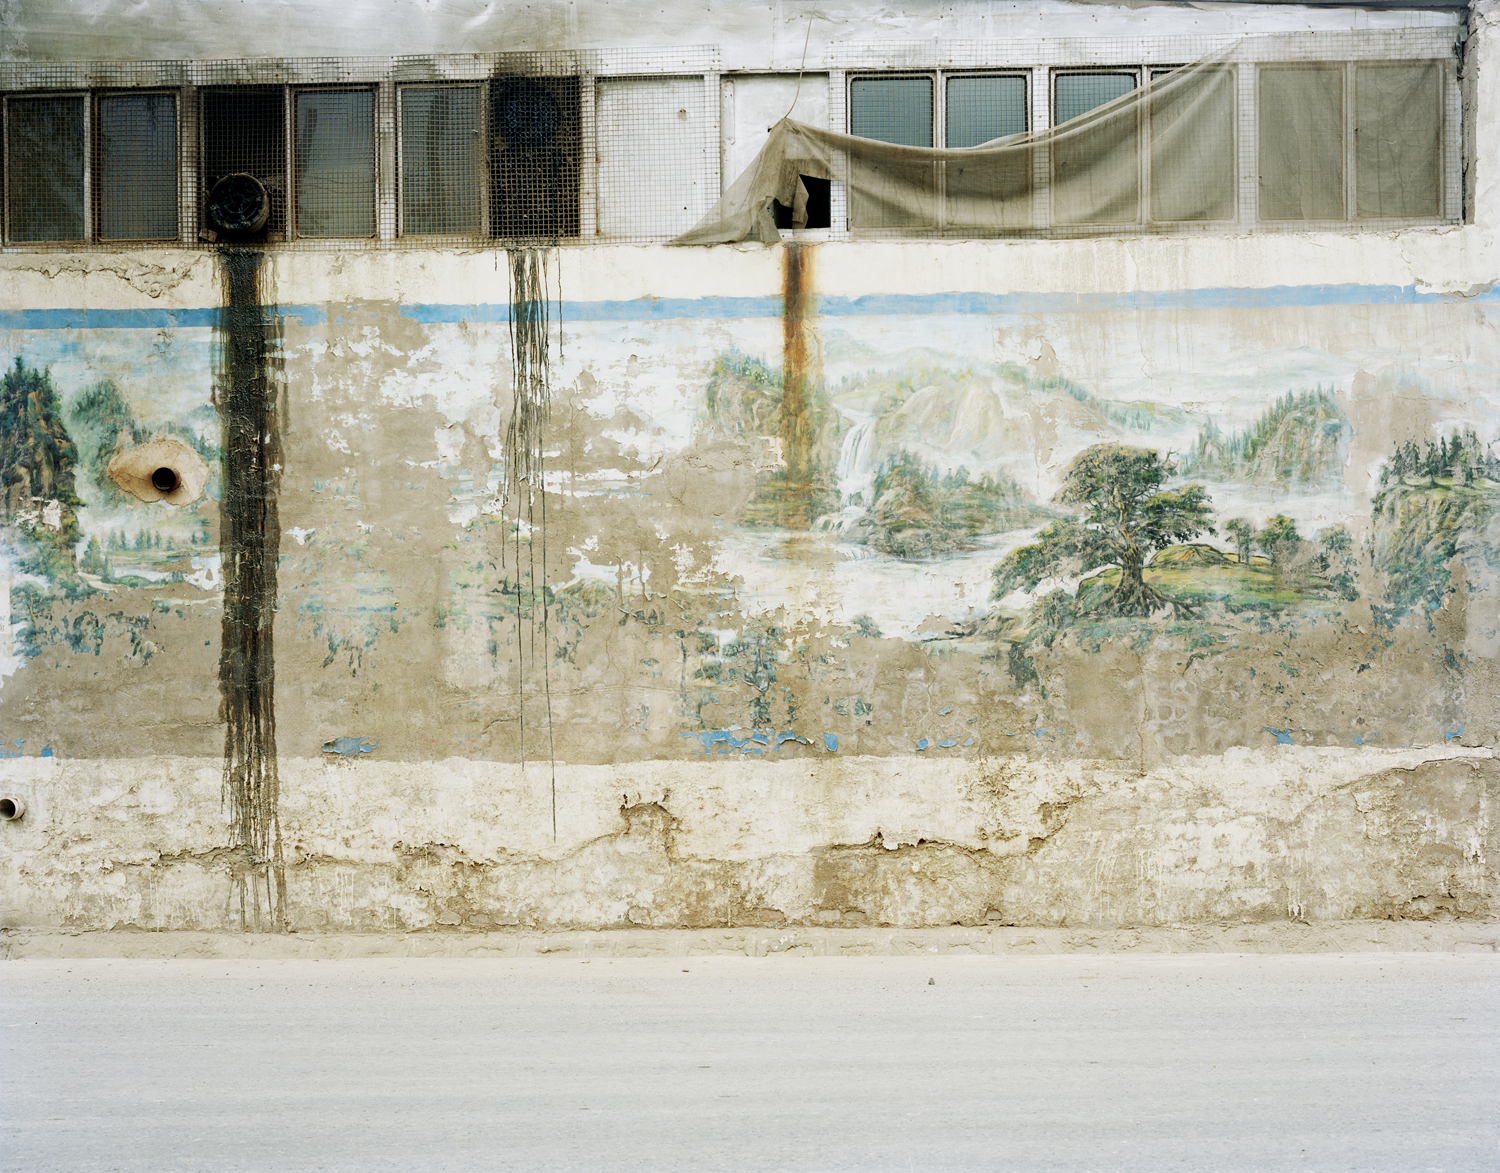 image: Landscape painting on a wall, Gansu province.